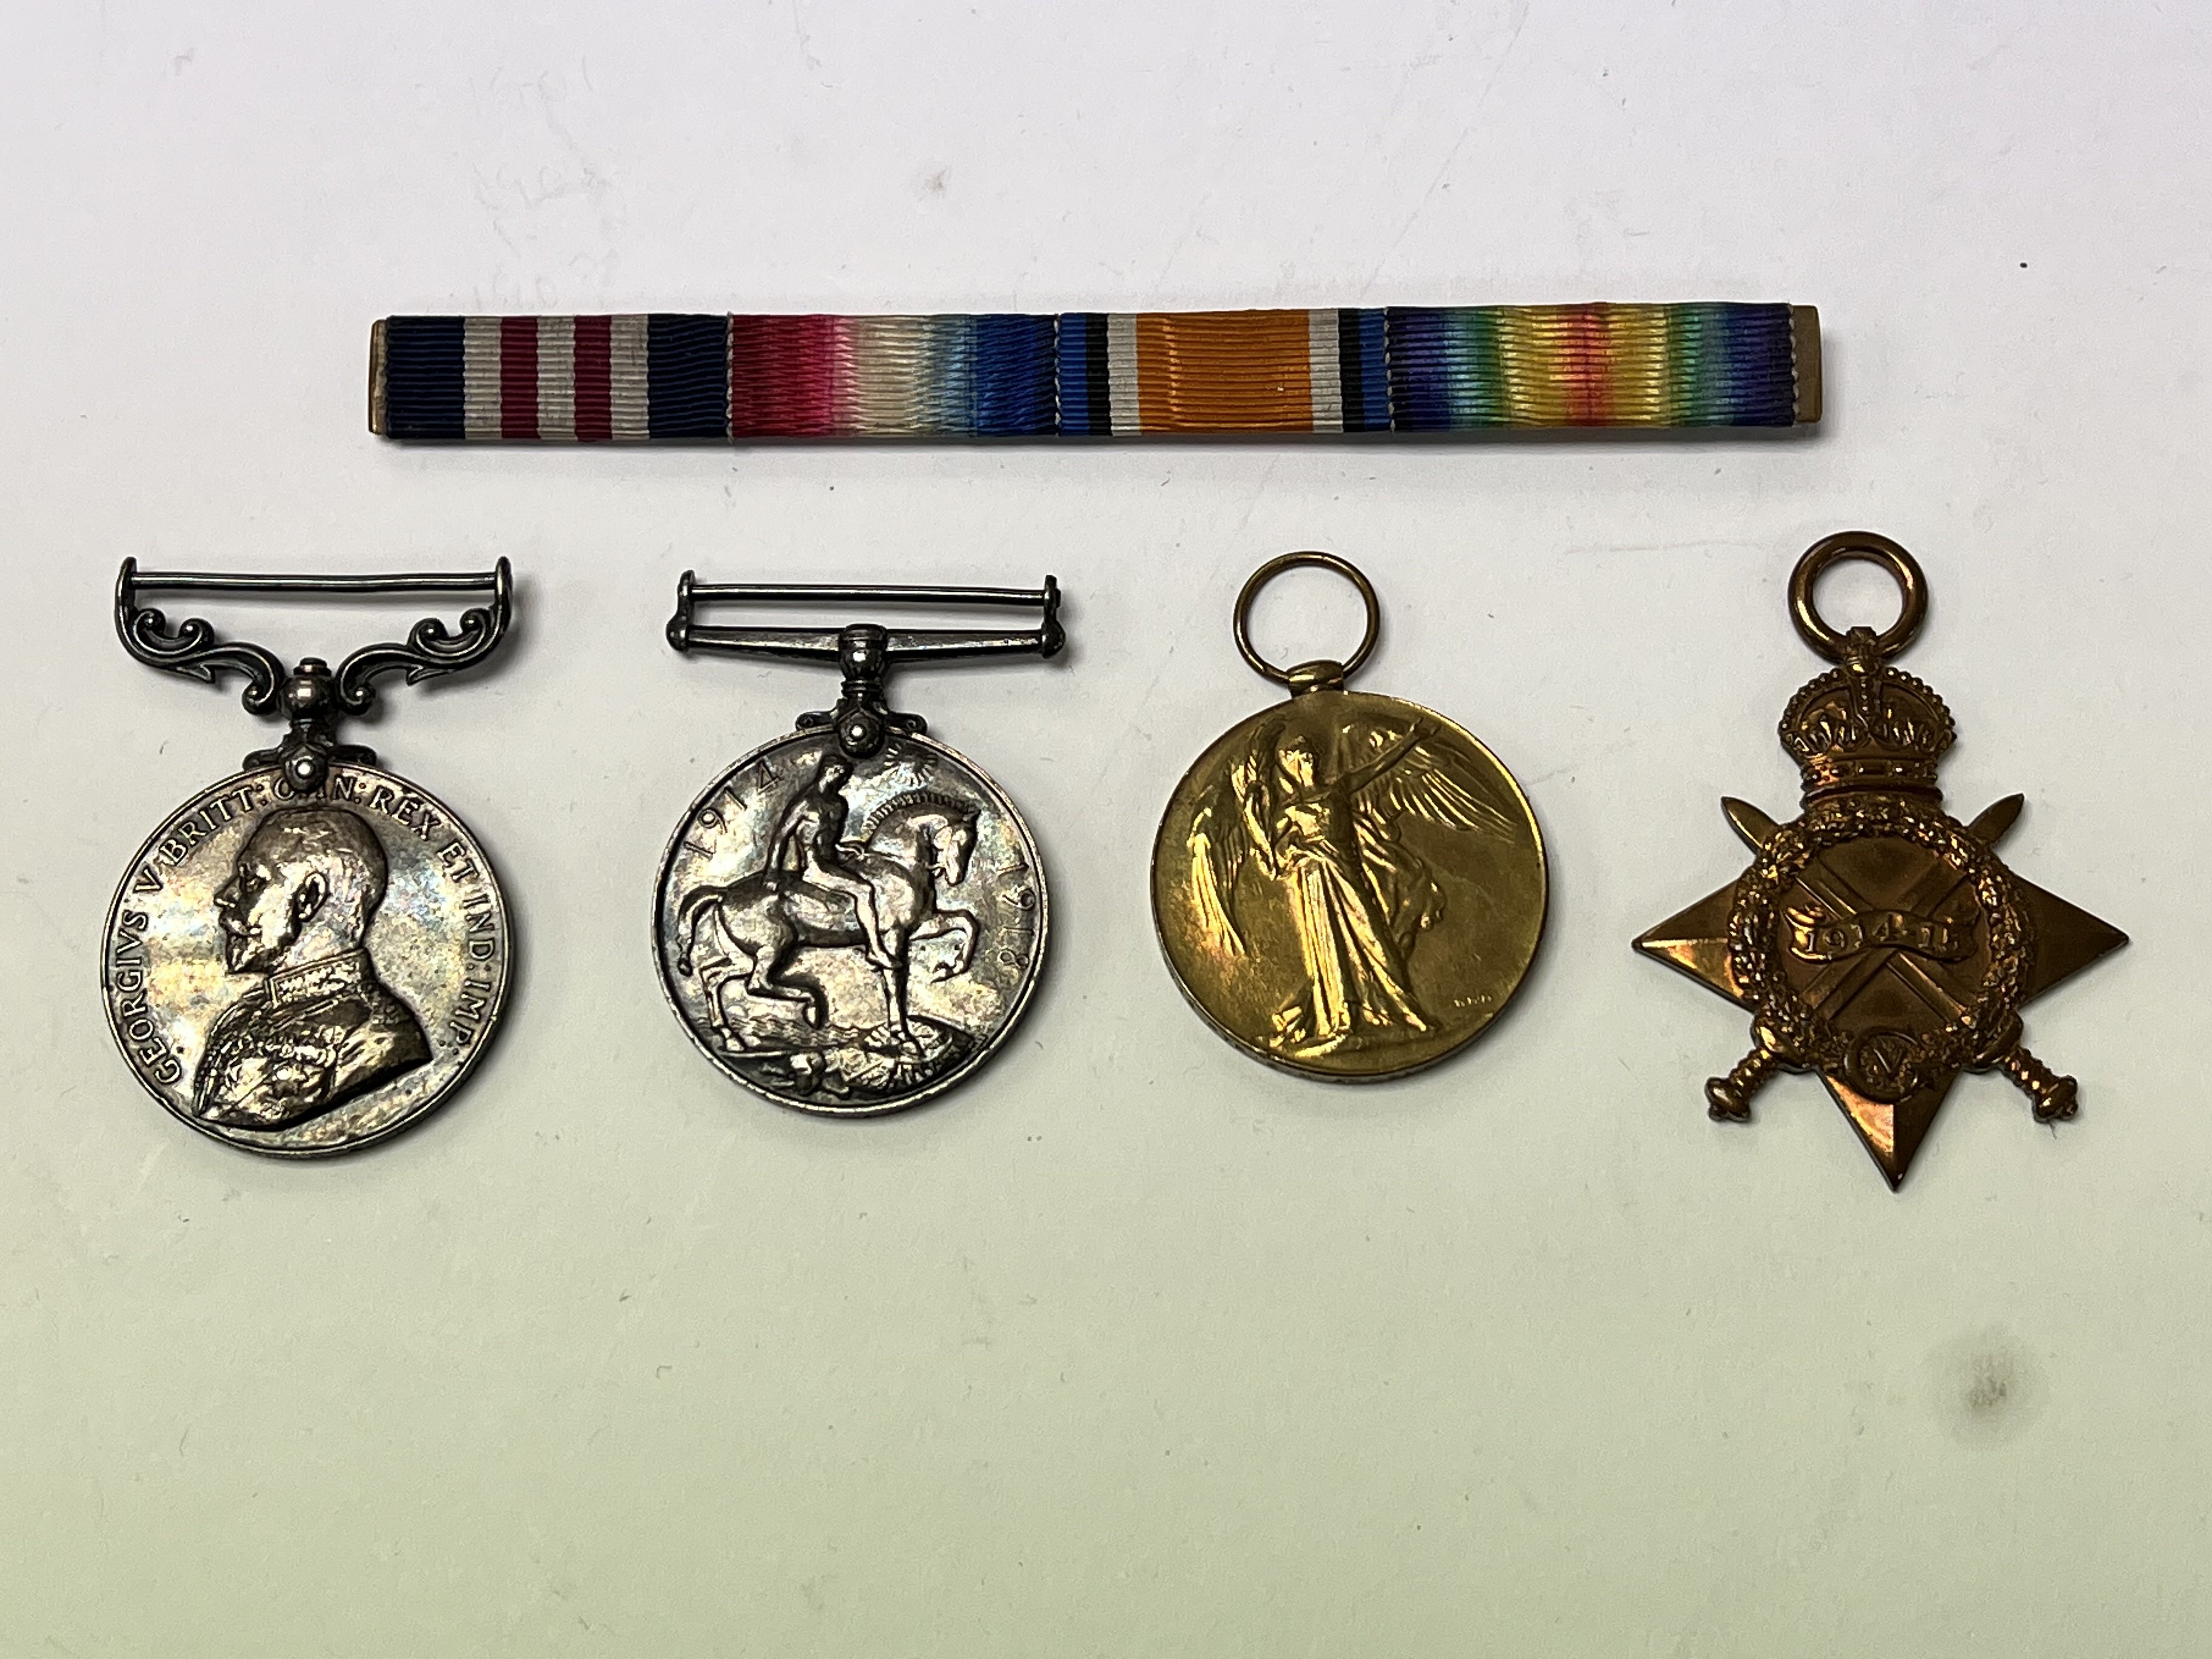 4 WW1 Medal group awarded to Pte E.M Arnold, 2714,